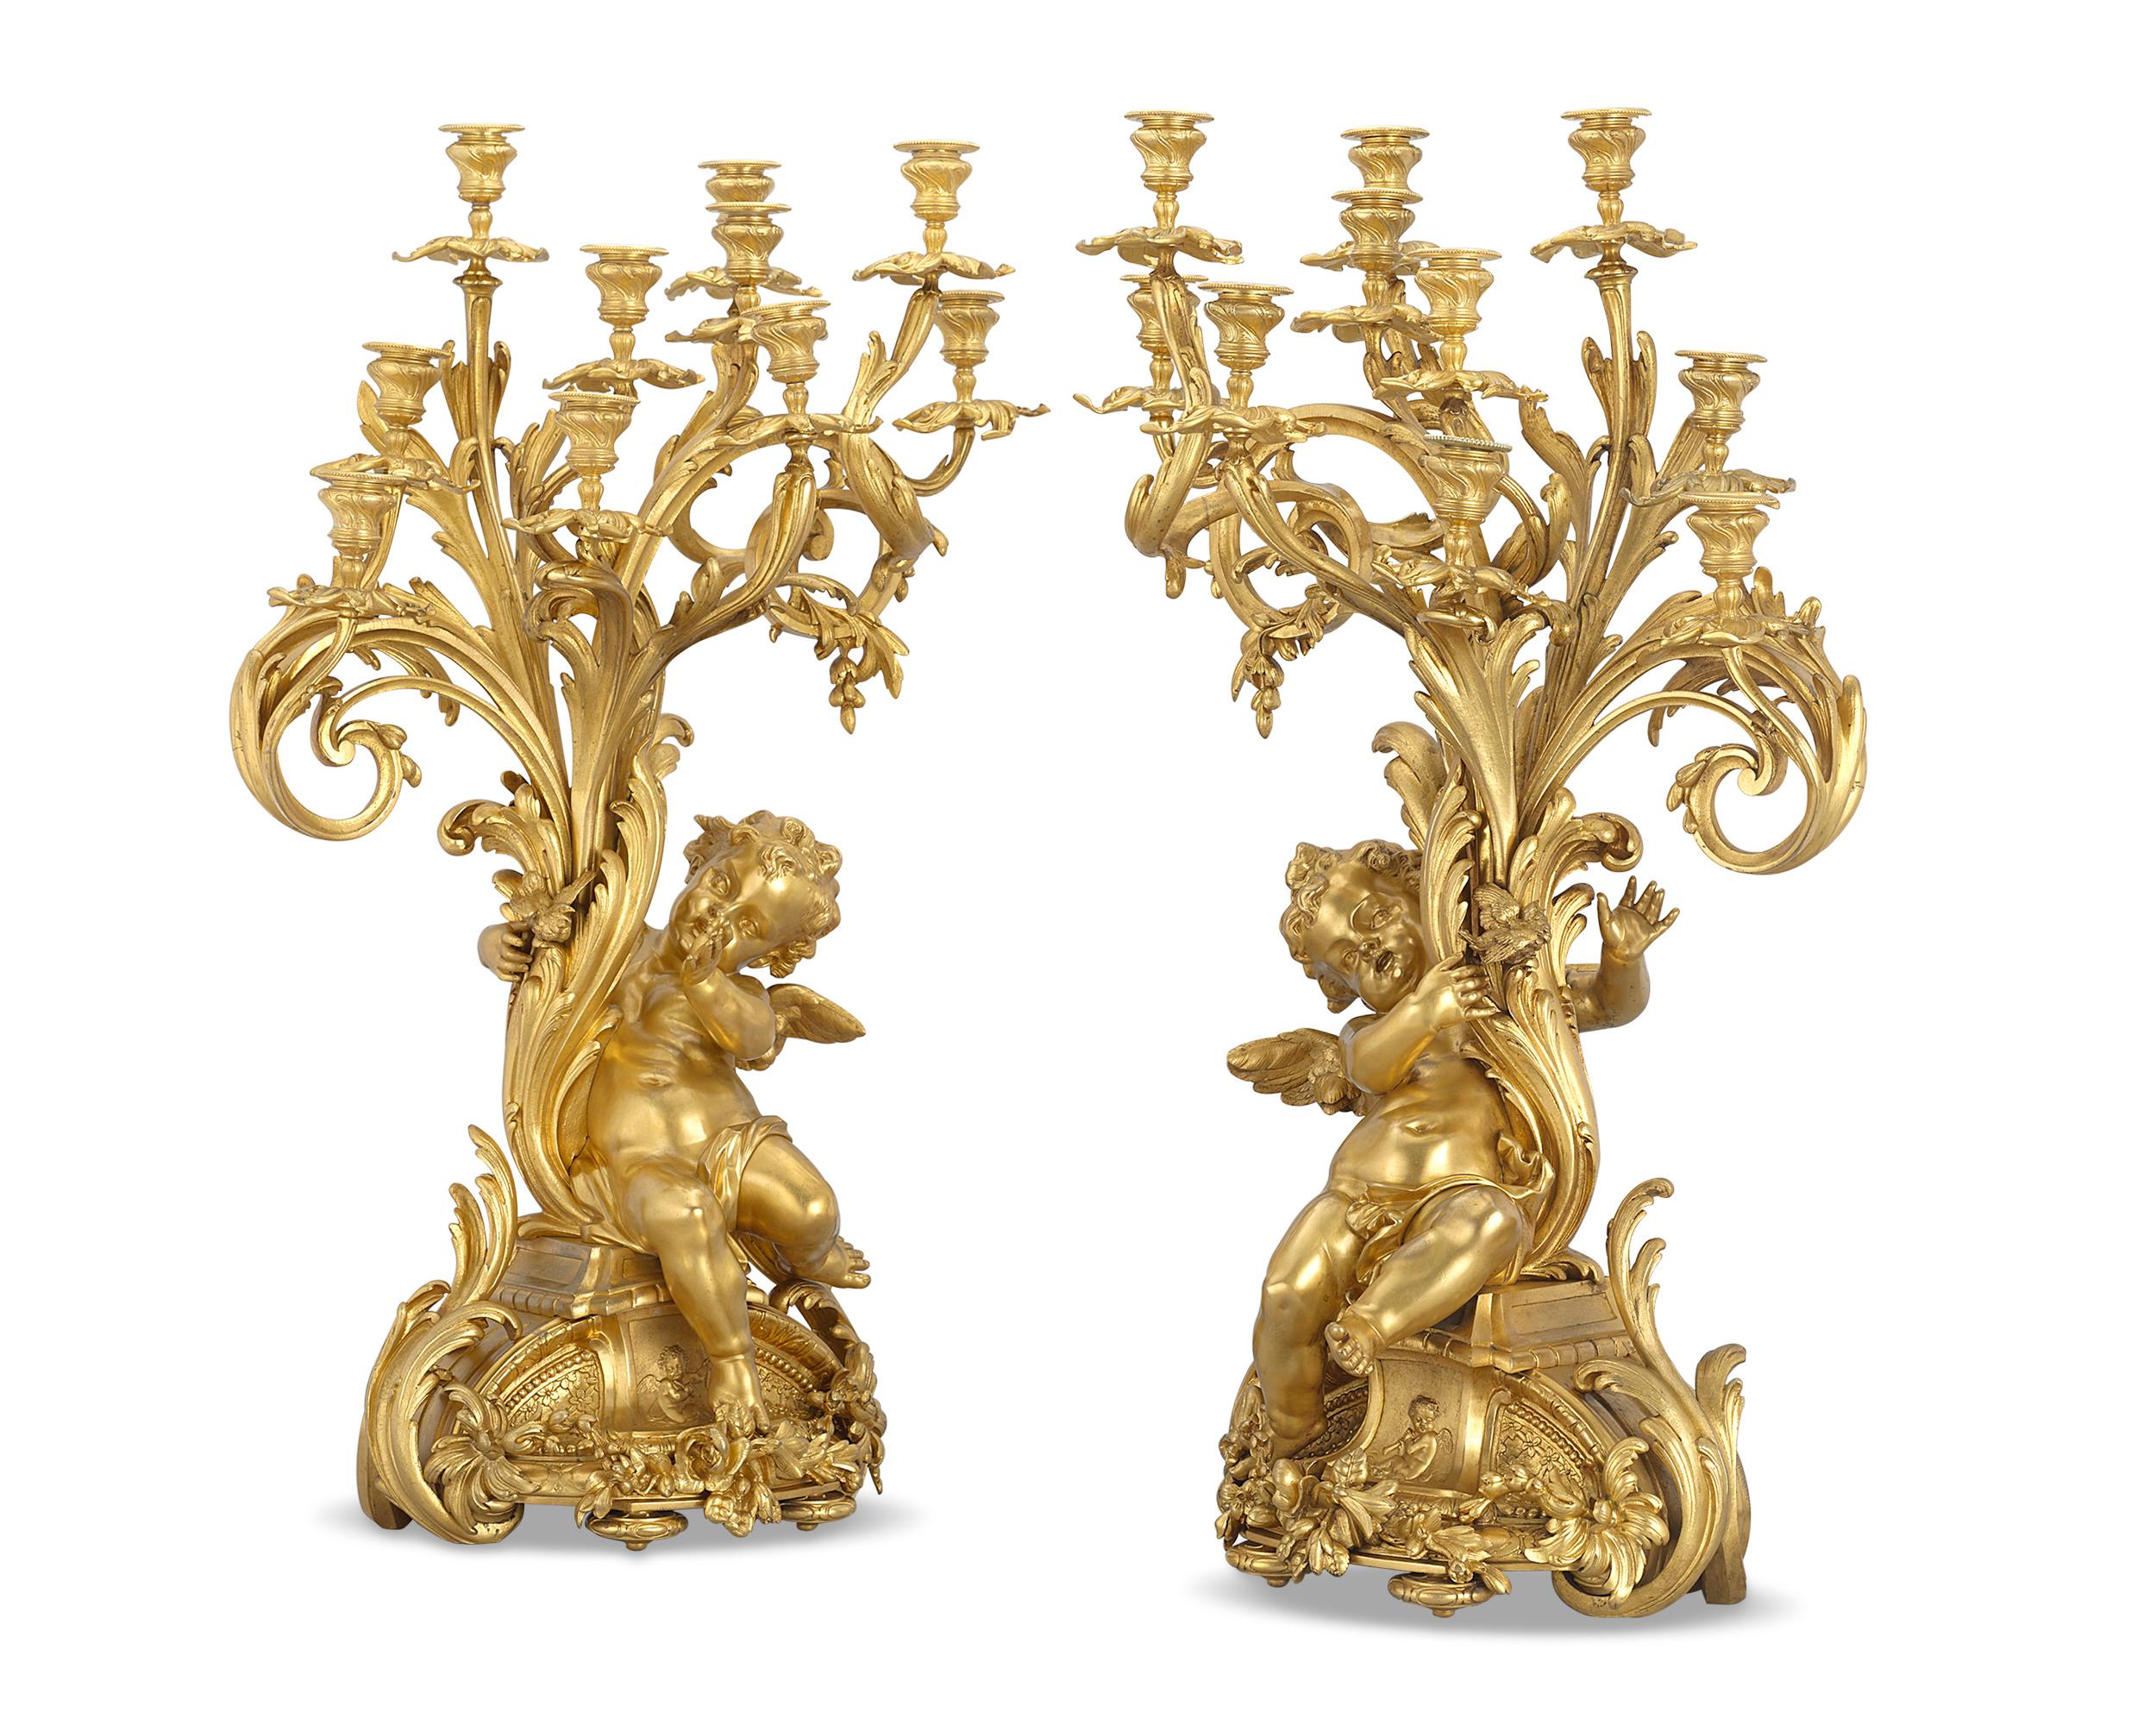 This rare and dramatic pair of Napoleon III gilt bronze candelabra were expertly cast and designed by the celebrated French bronzeur Ferdinand Barbedienne. Masterfully crafted, the candelabra are exemplary of the Rococo aesthetic. Organic swirls and